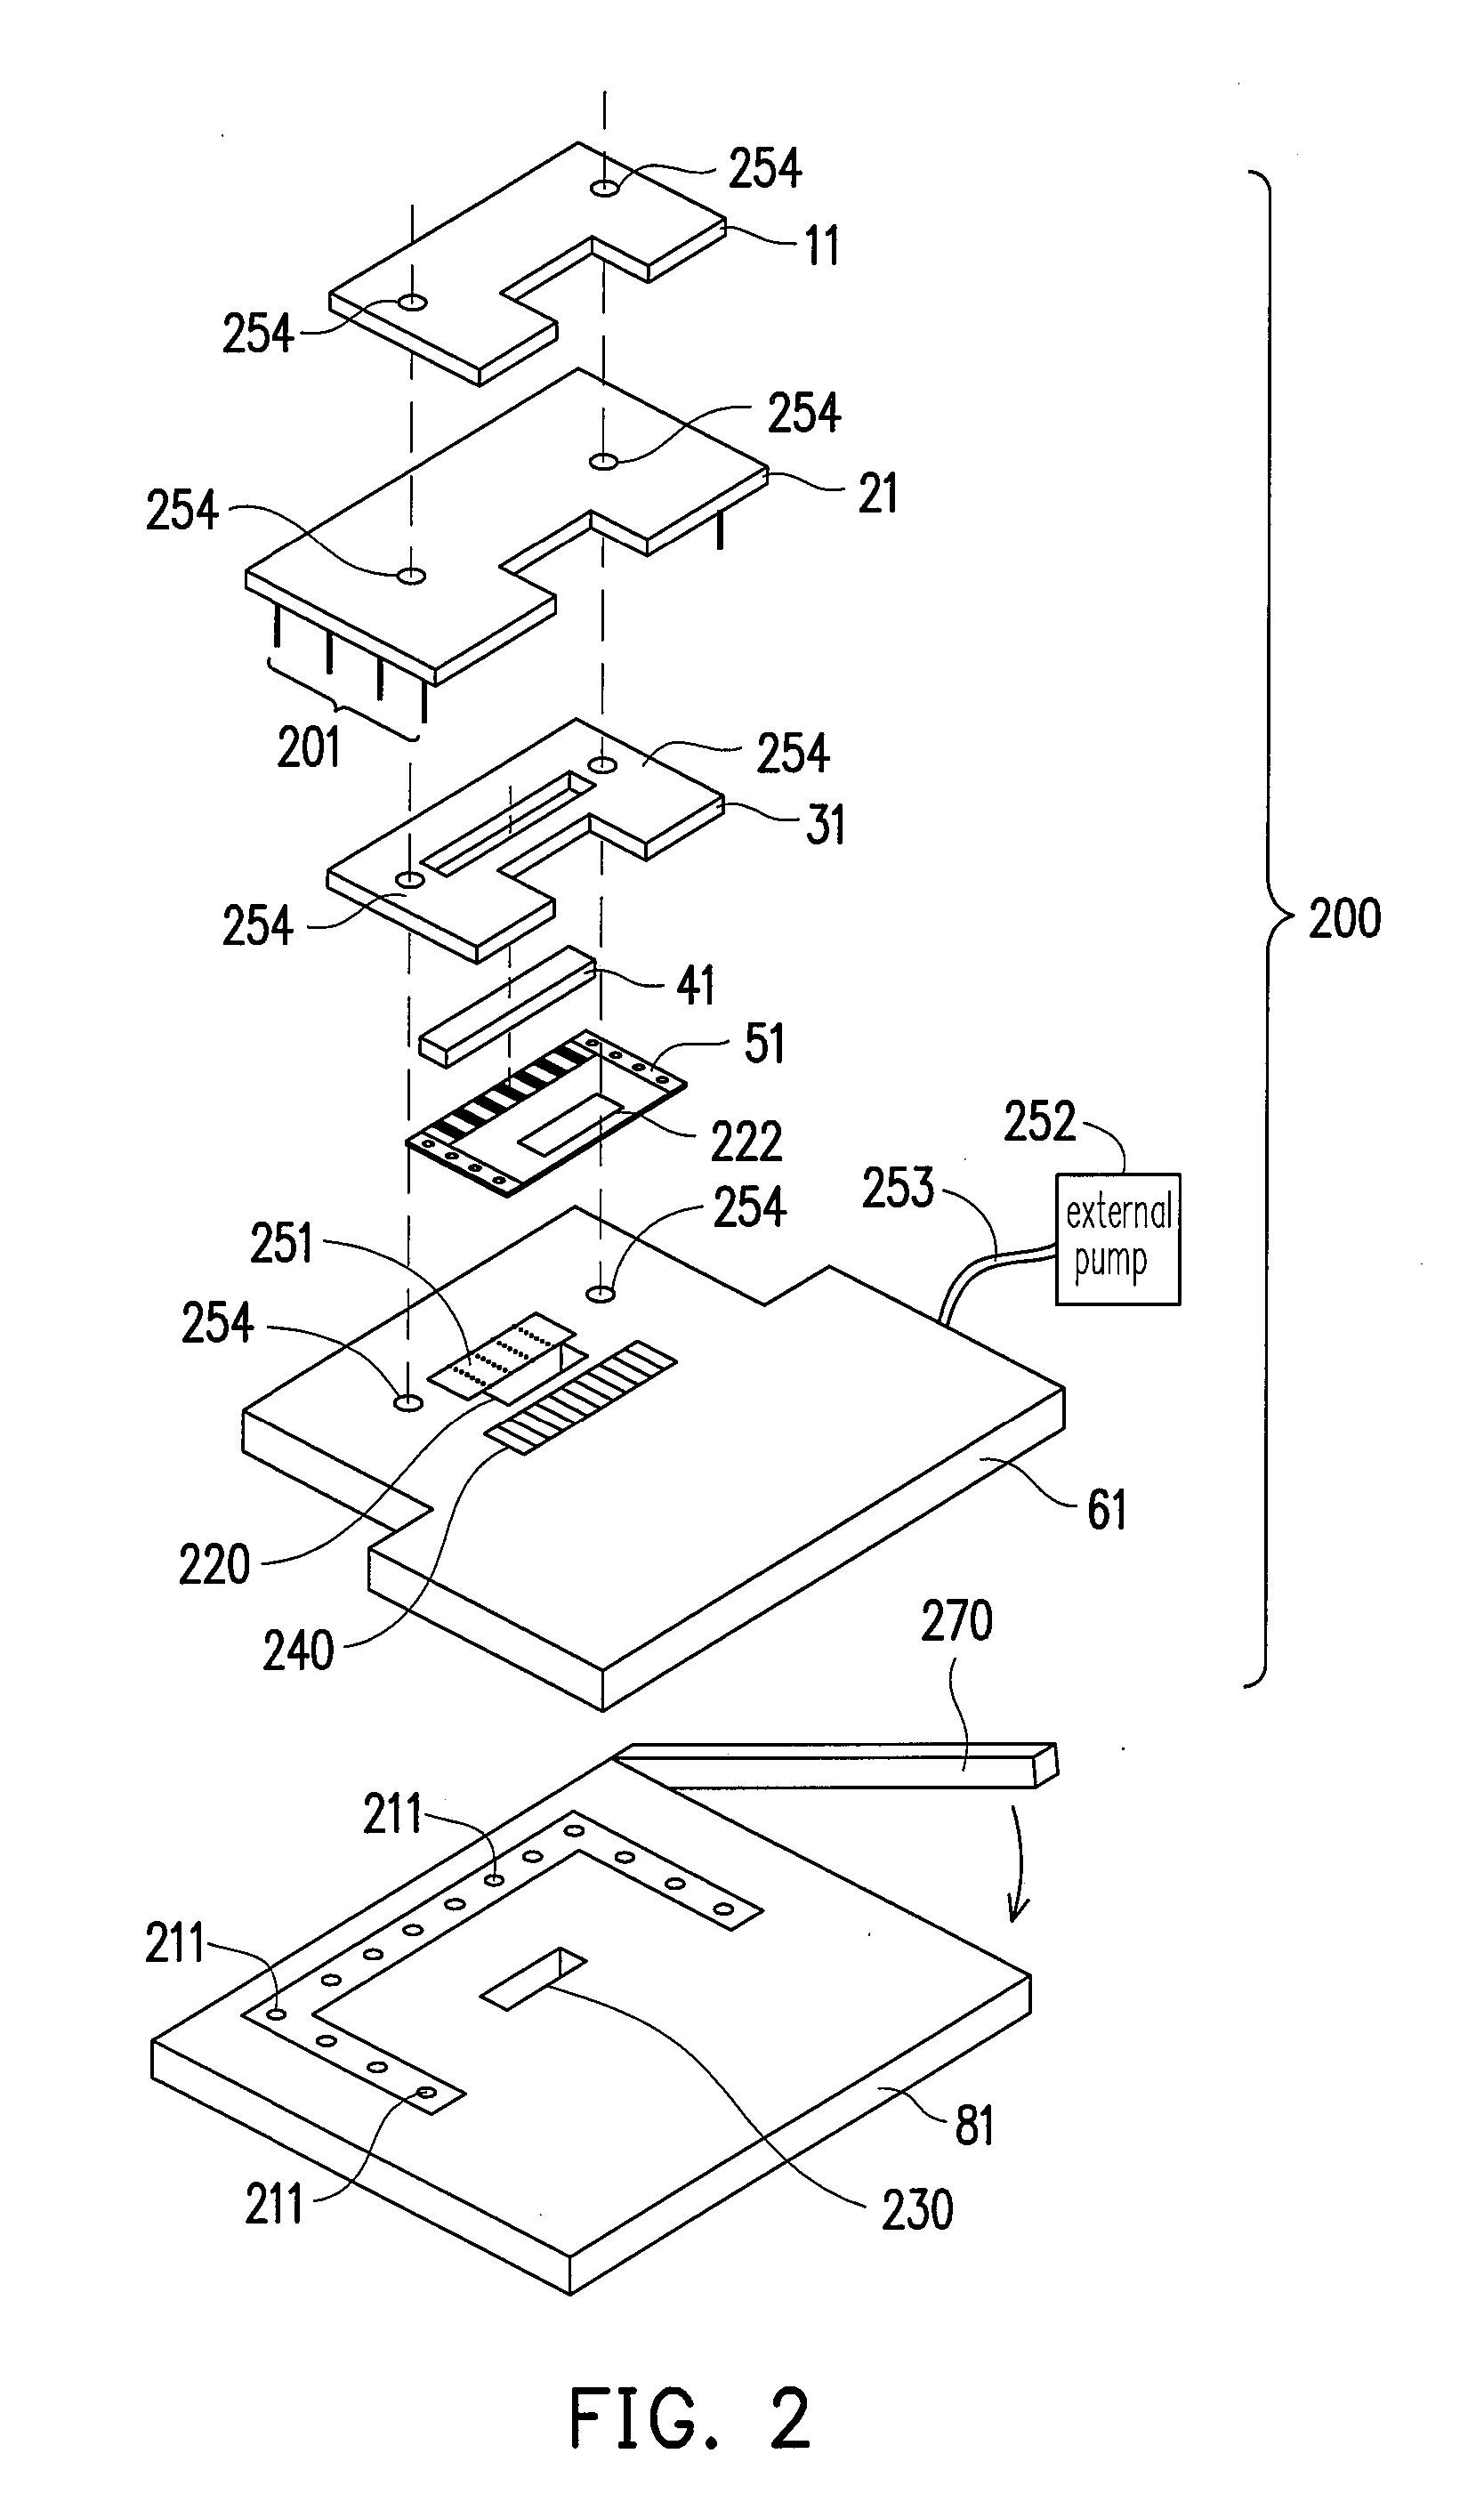 Fixture for analyzing thin flexible electronic device